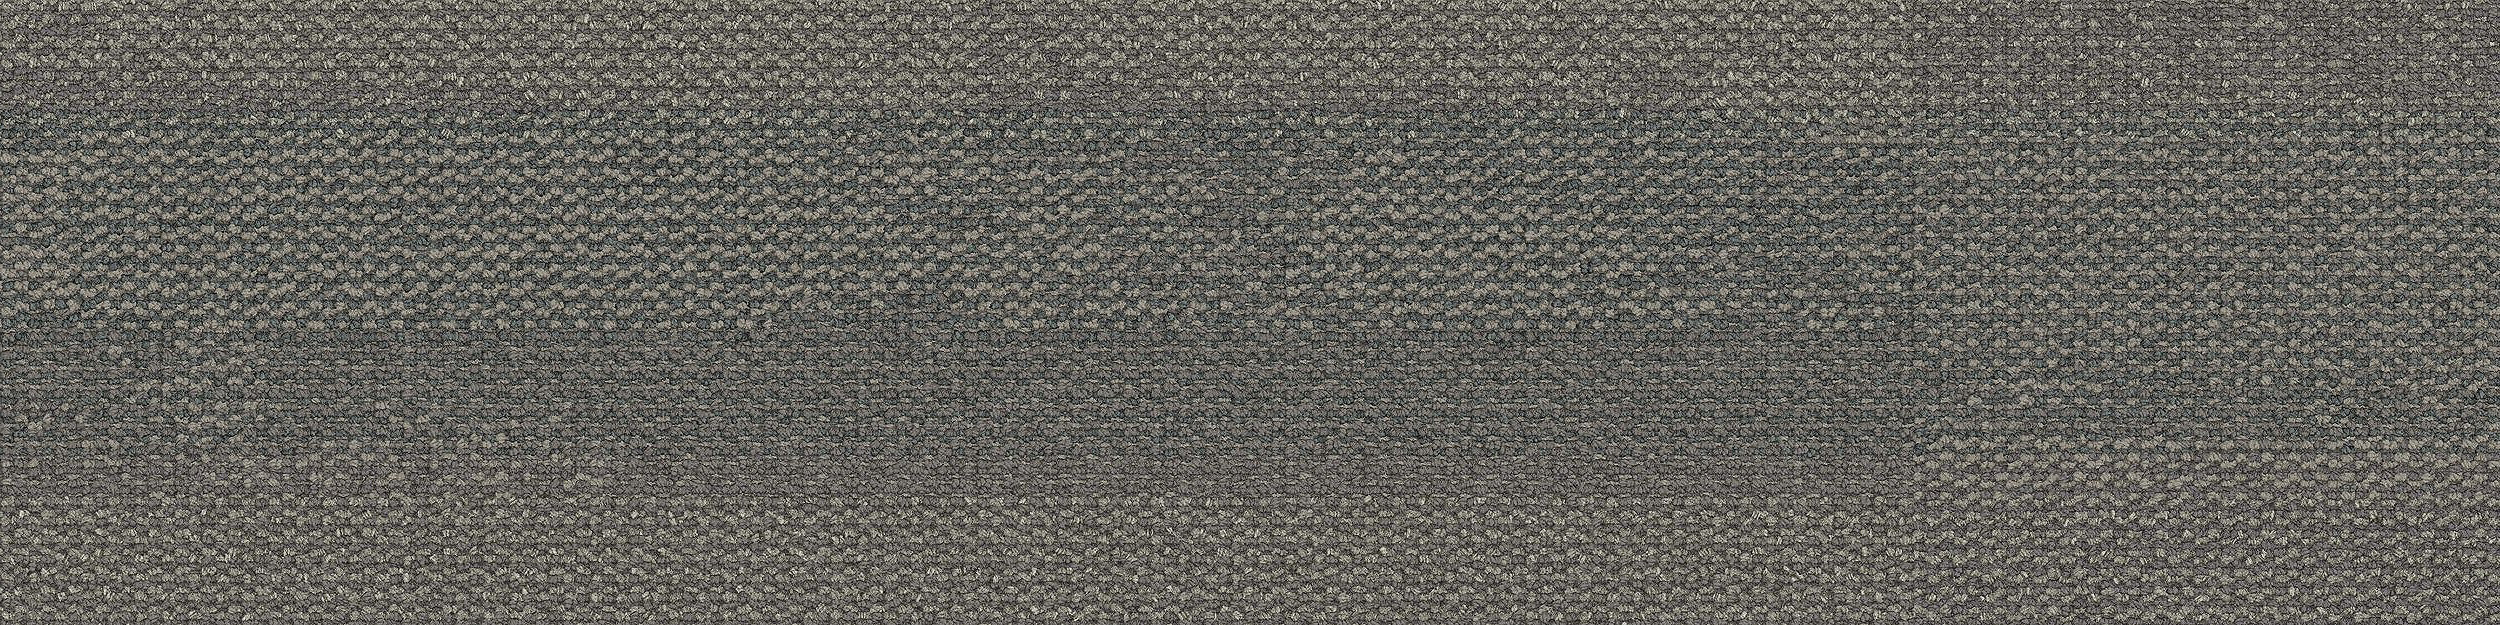 Naturally Weathered Carpet Tile In Greystone numéro d’image 10